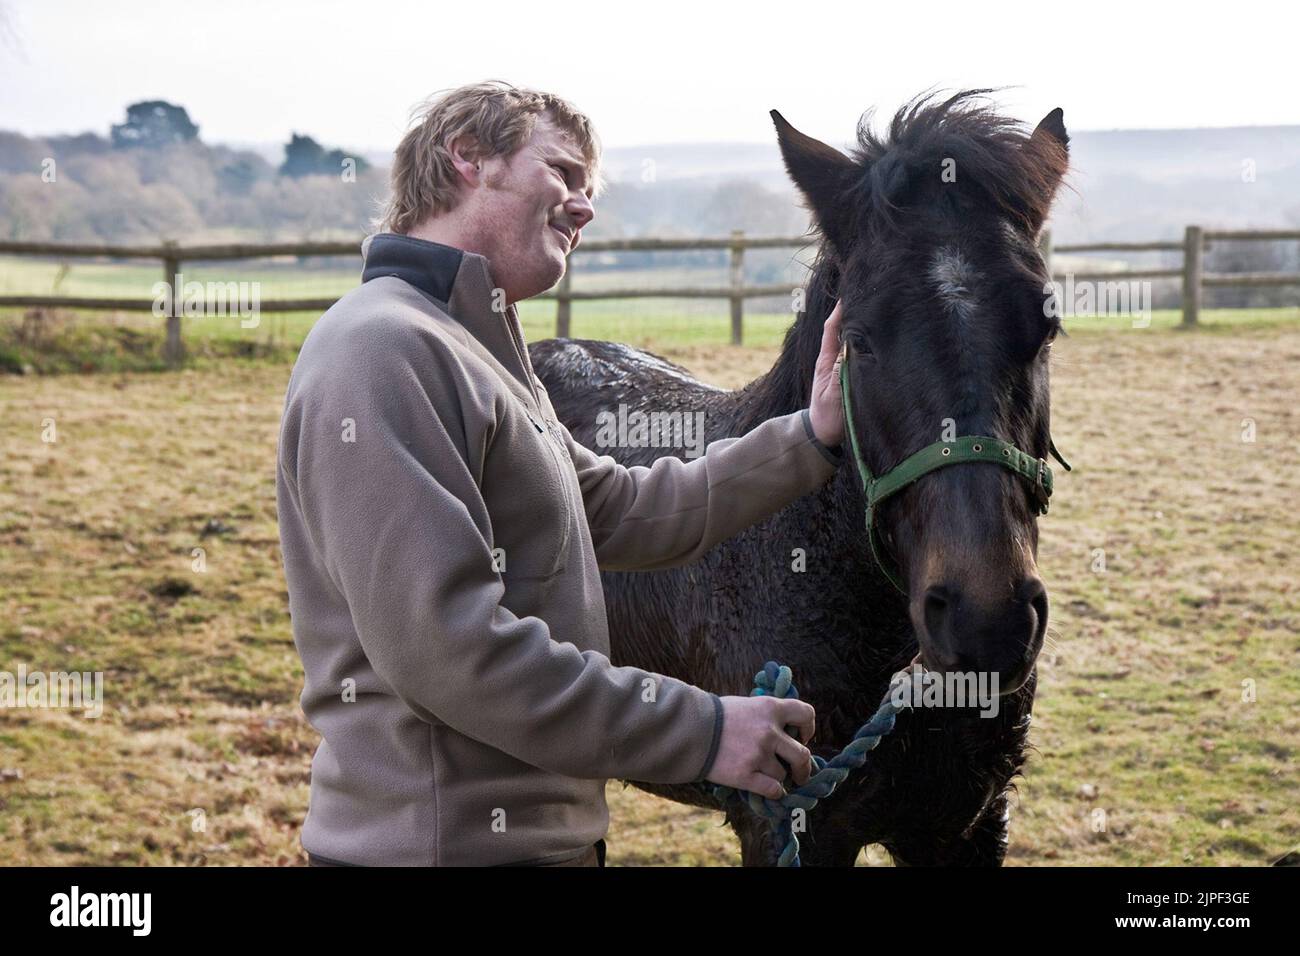 MISCHIEF'S OWNER LUKE GAMBLE WITH THE HORSE AFTER IT WAS RESCUED AFTER GETTING STUCK IN A SWIMMING POOL AT gODSHILL IN THE NEW FOREST. MIKE WALKER PICTURES,2011 Stock Photo